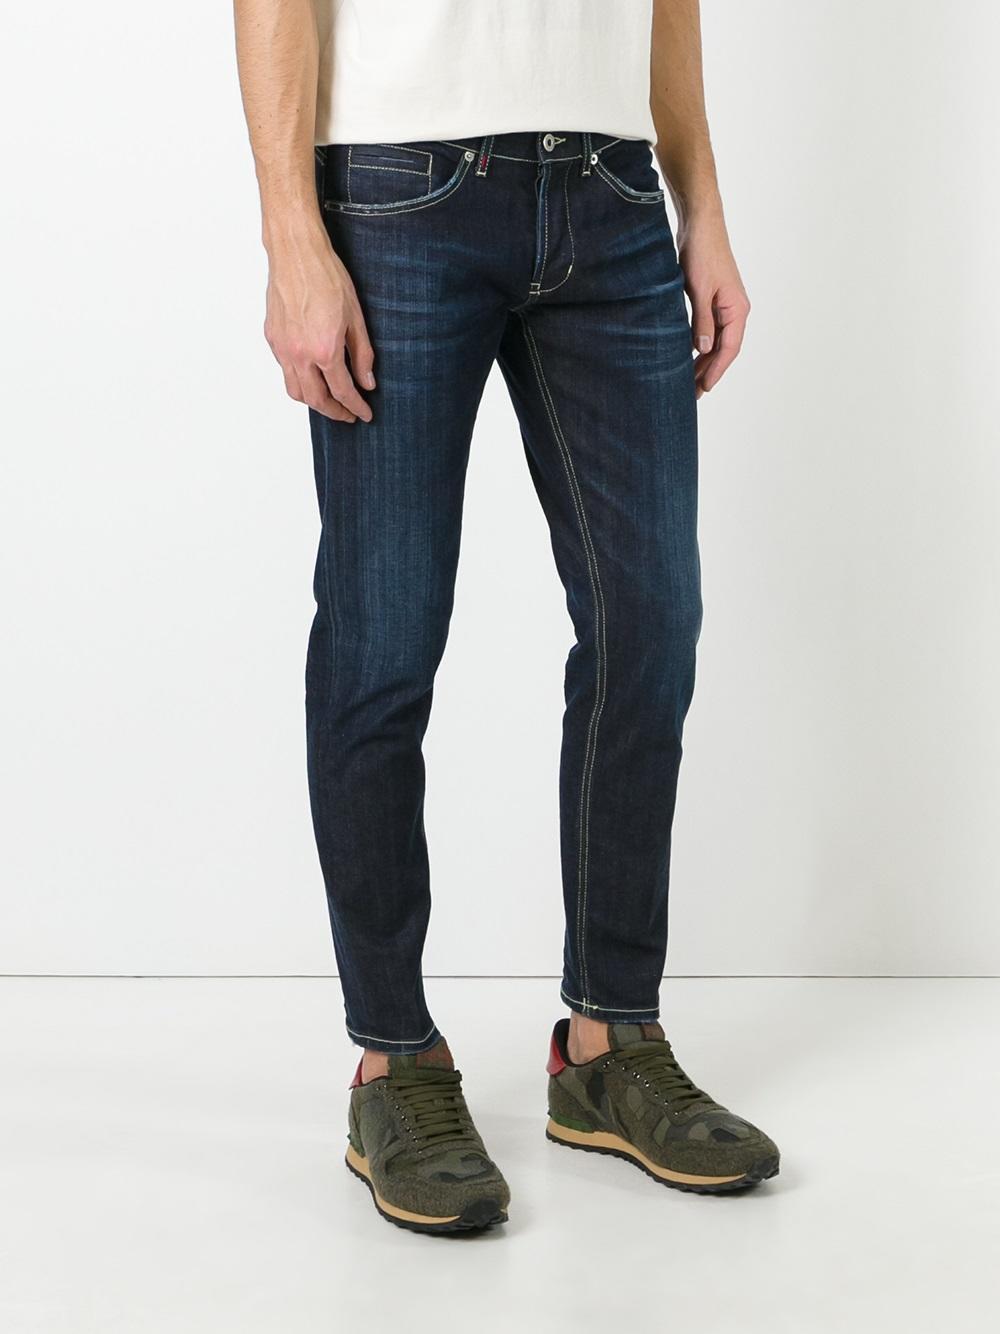 Lyst - Dondup George Jeans in Blue for Men